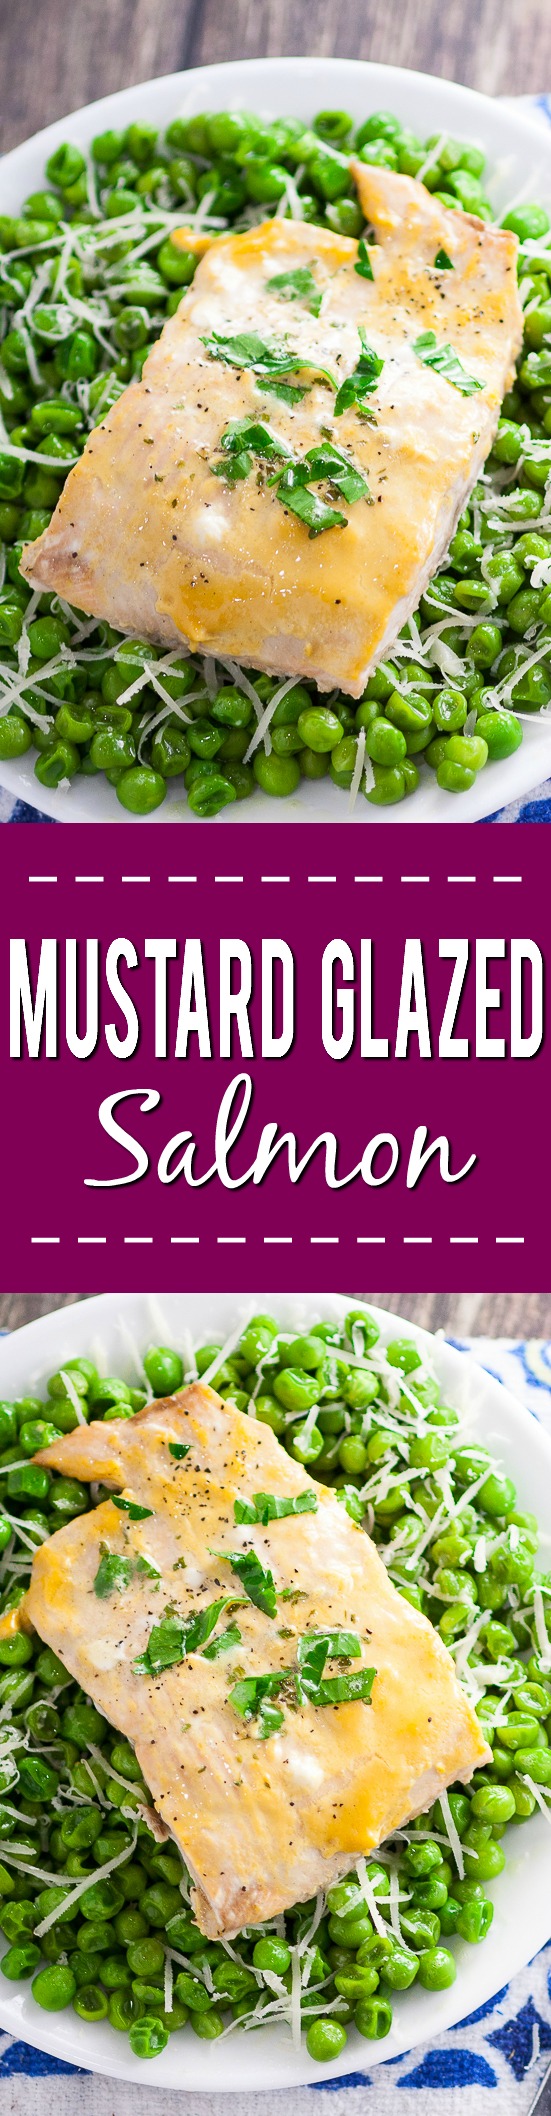 Mustard Glazed Salmon Recipe - Tangy but sweet Mustard Glazed Salmon is a quick and easy but also classic and elegant salmon recipe with only 5 ingredients! Make it in just 20 minutes!